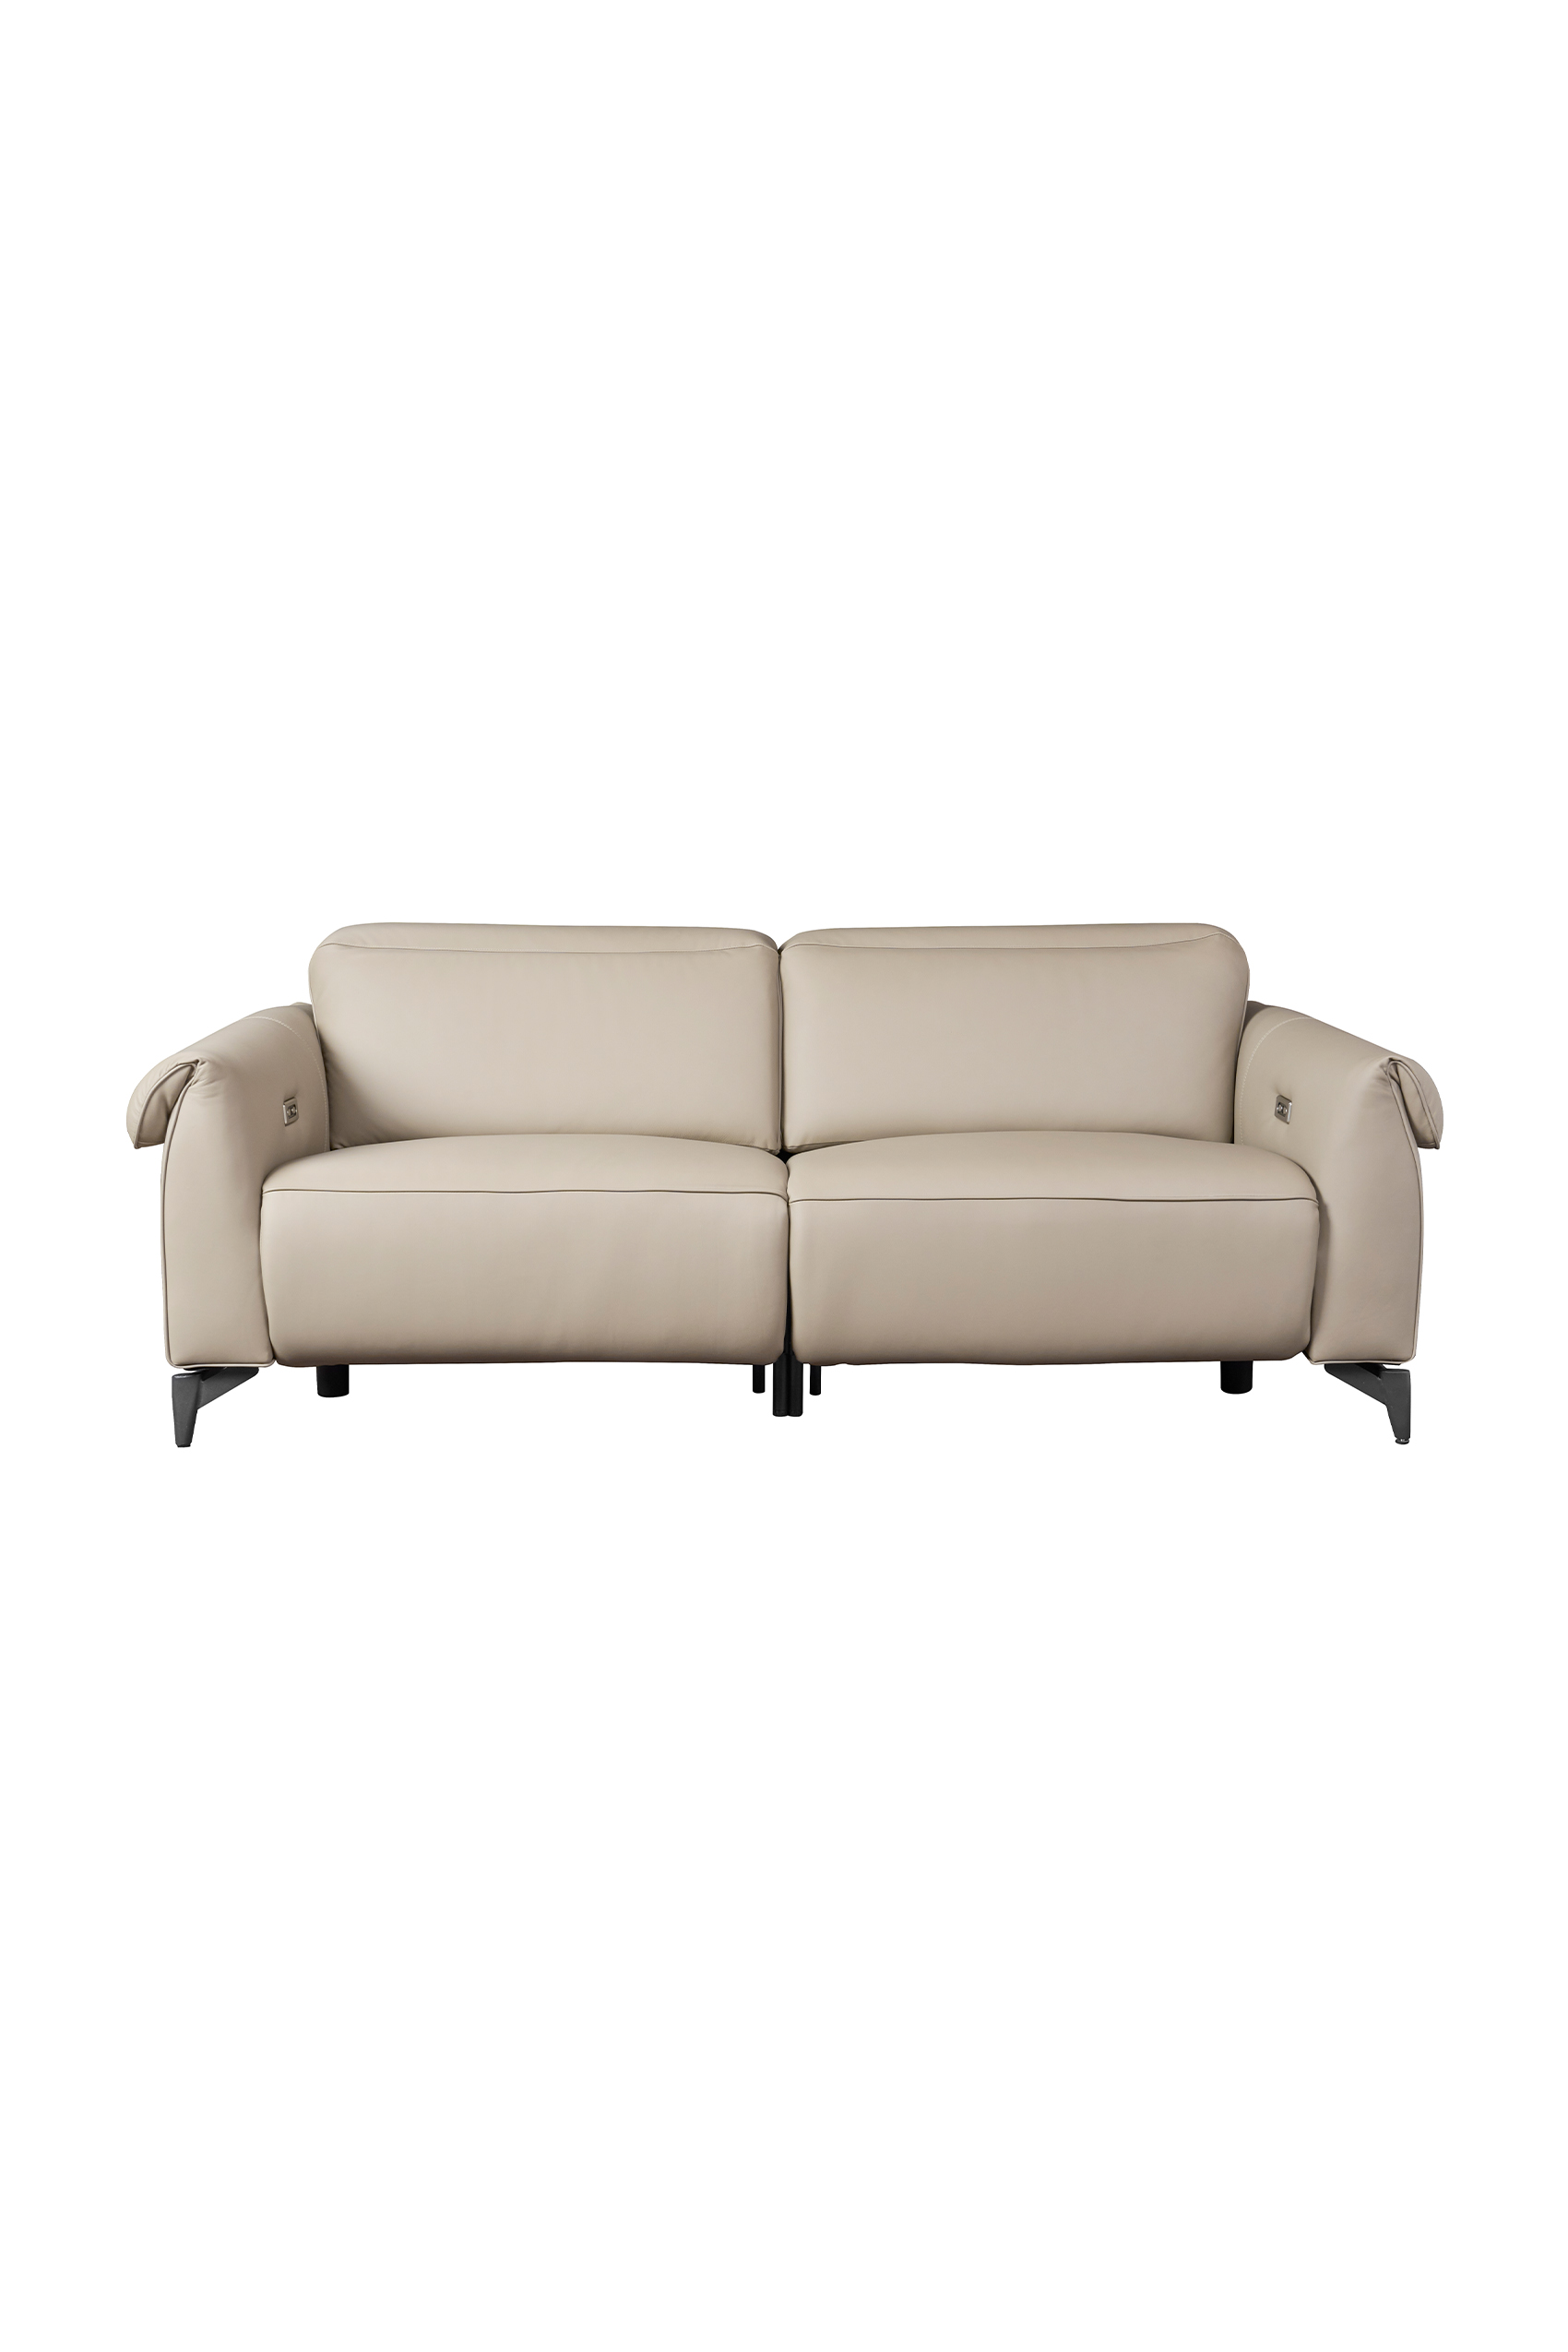 Loceri Leather Sofa with Dual Recliner